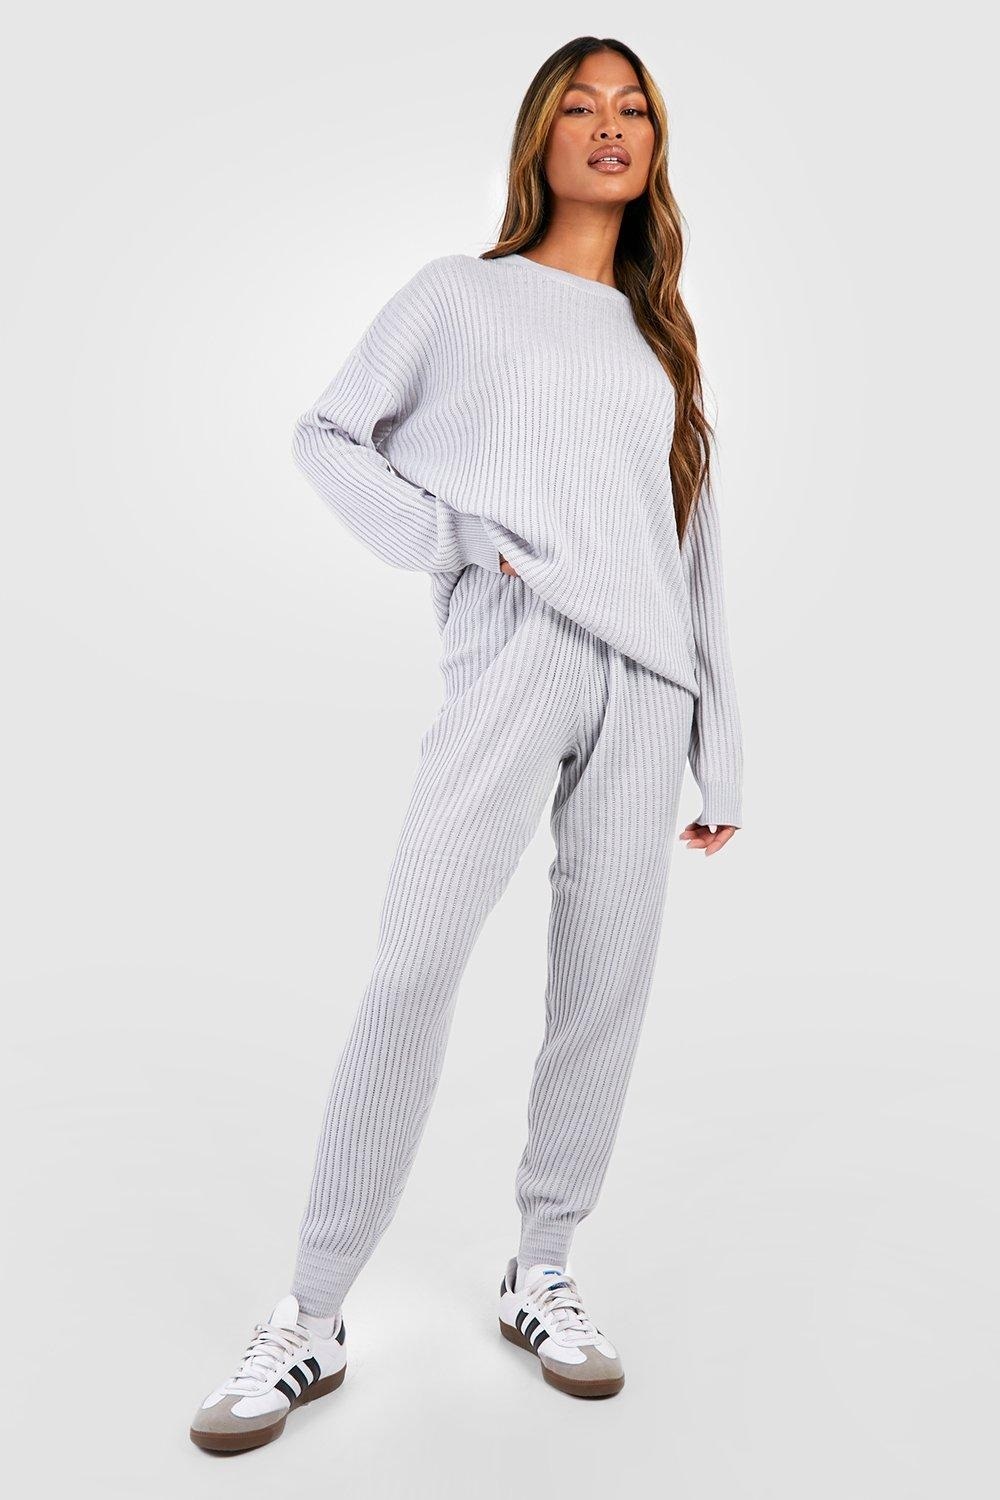 Tracksuit At The Airport?  Sporty And Comfortable Looks By Boohoo Inspired By Tamara Falcó.